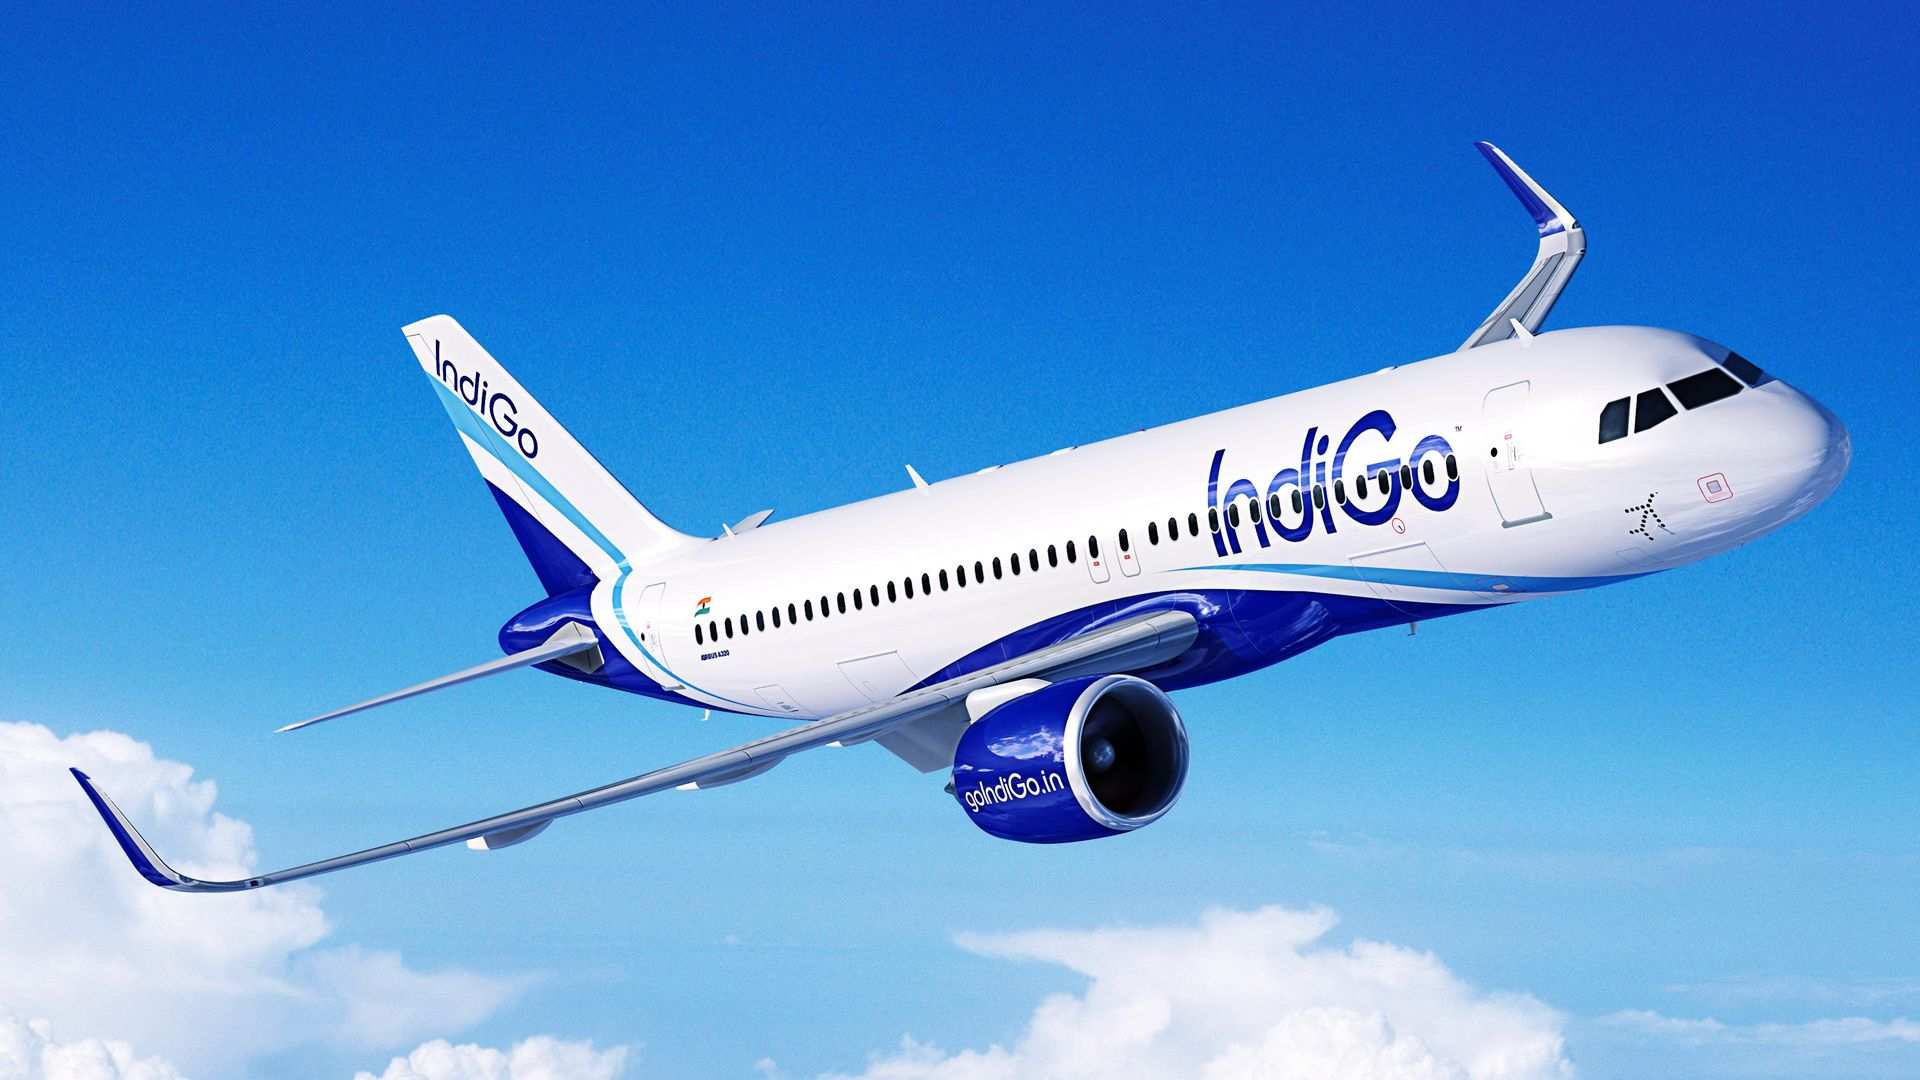 Mentally Ill Passenger Locks Self in Toilet on IndiGo Flight, Detained for Unruly Conduct